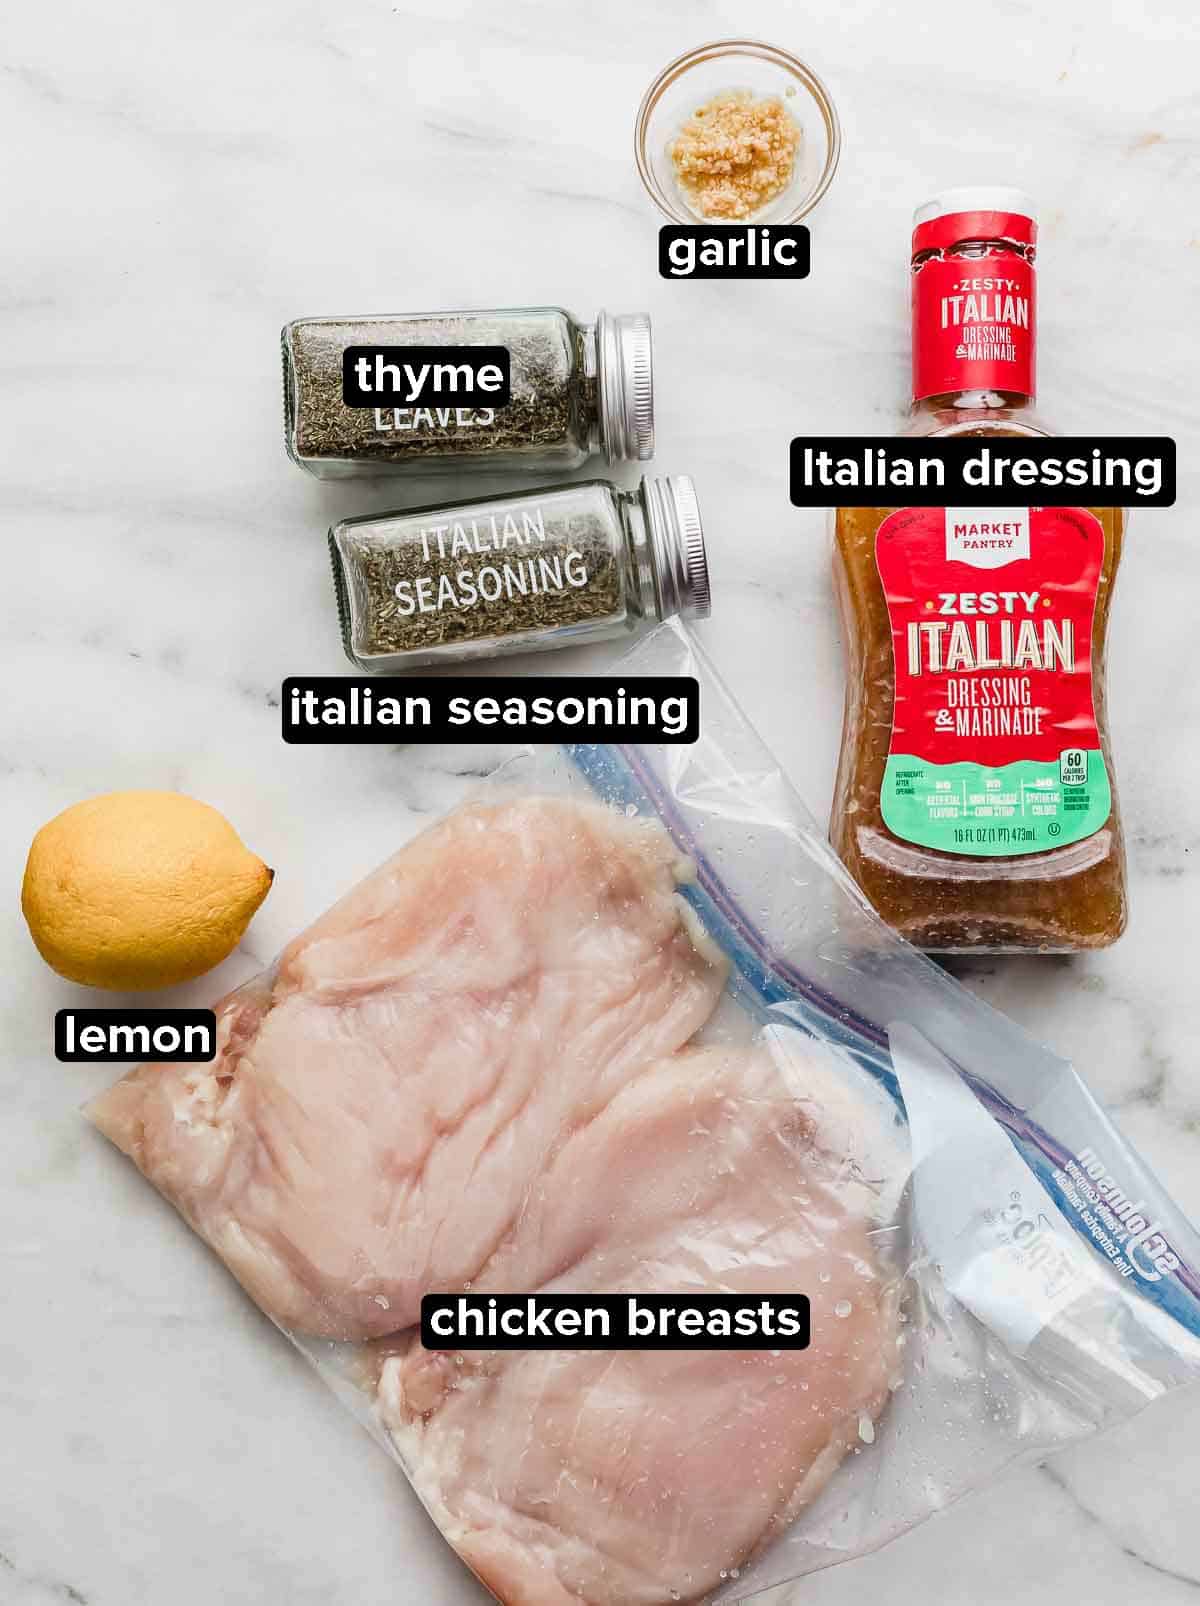 Italian Grilled Chicken ingredients on a white background: raw chicken breasts, lemon, Italian salad dressing, garlic, thyme and Italian seasoning.